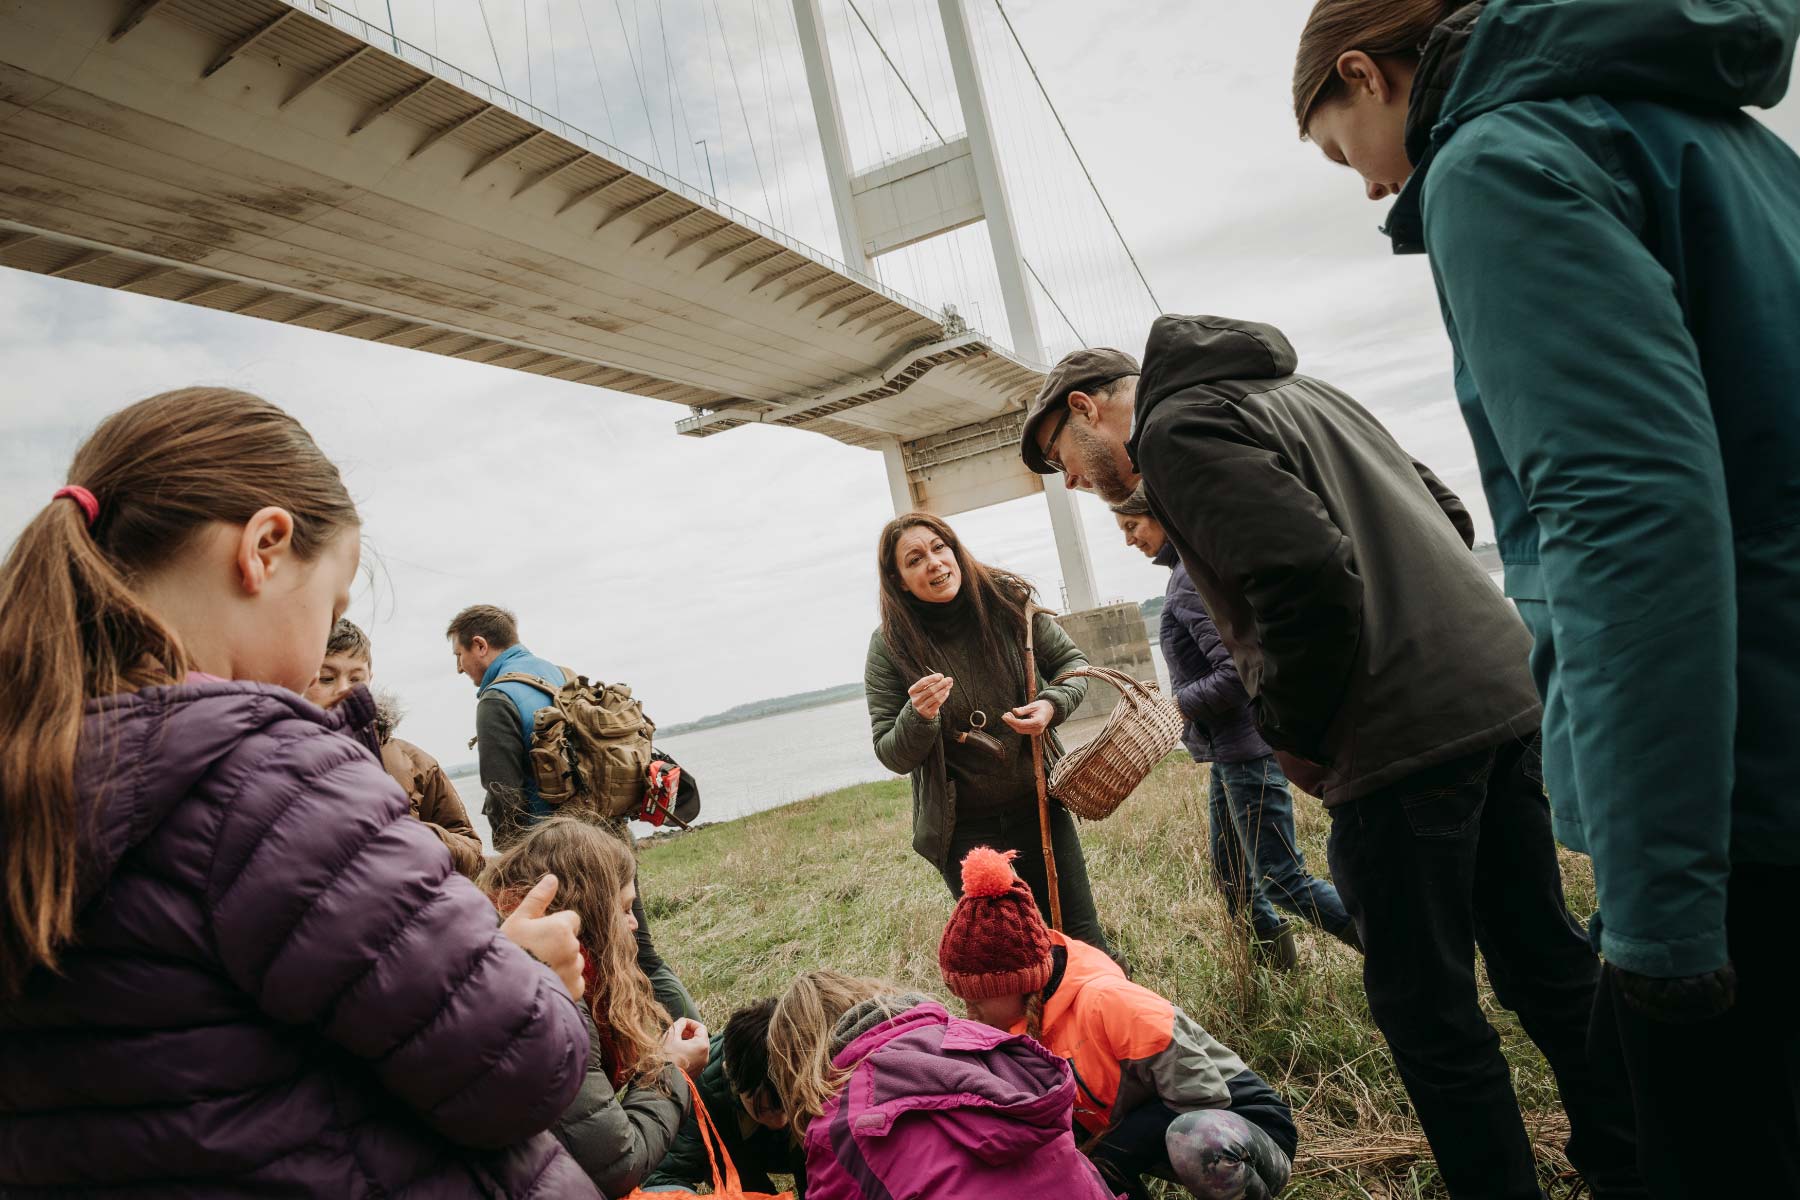 Local forager educates customers on the local habit against the backdrop of the Severn Estuary and bridge